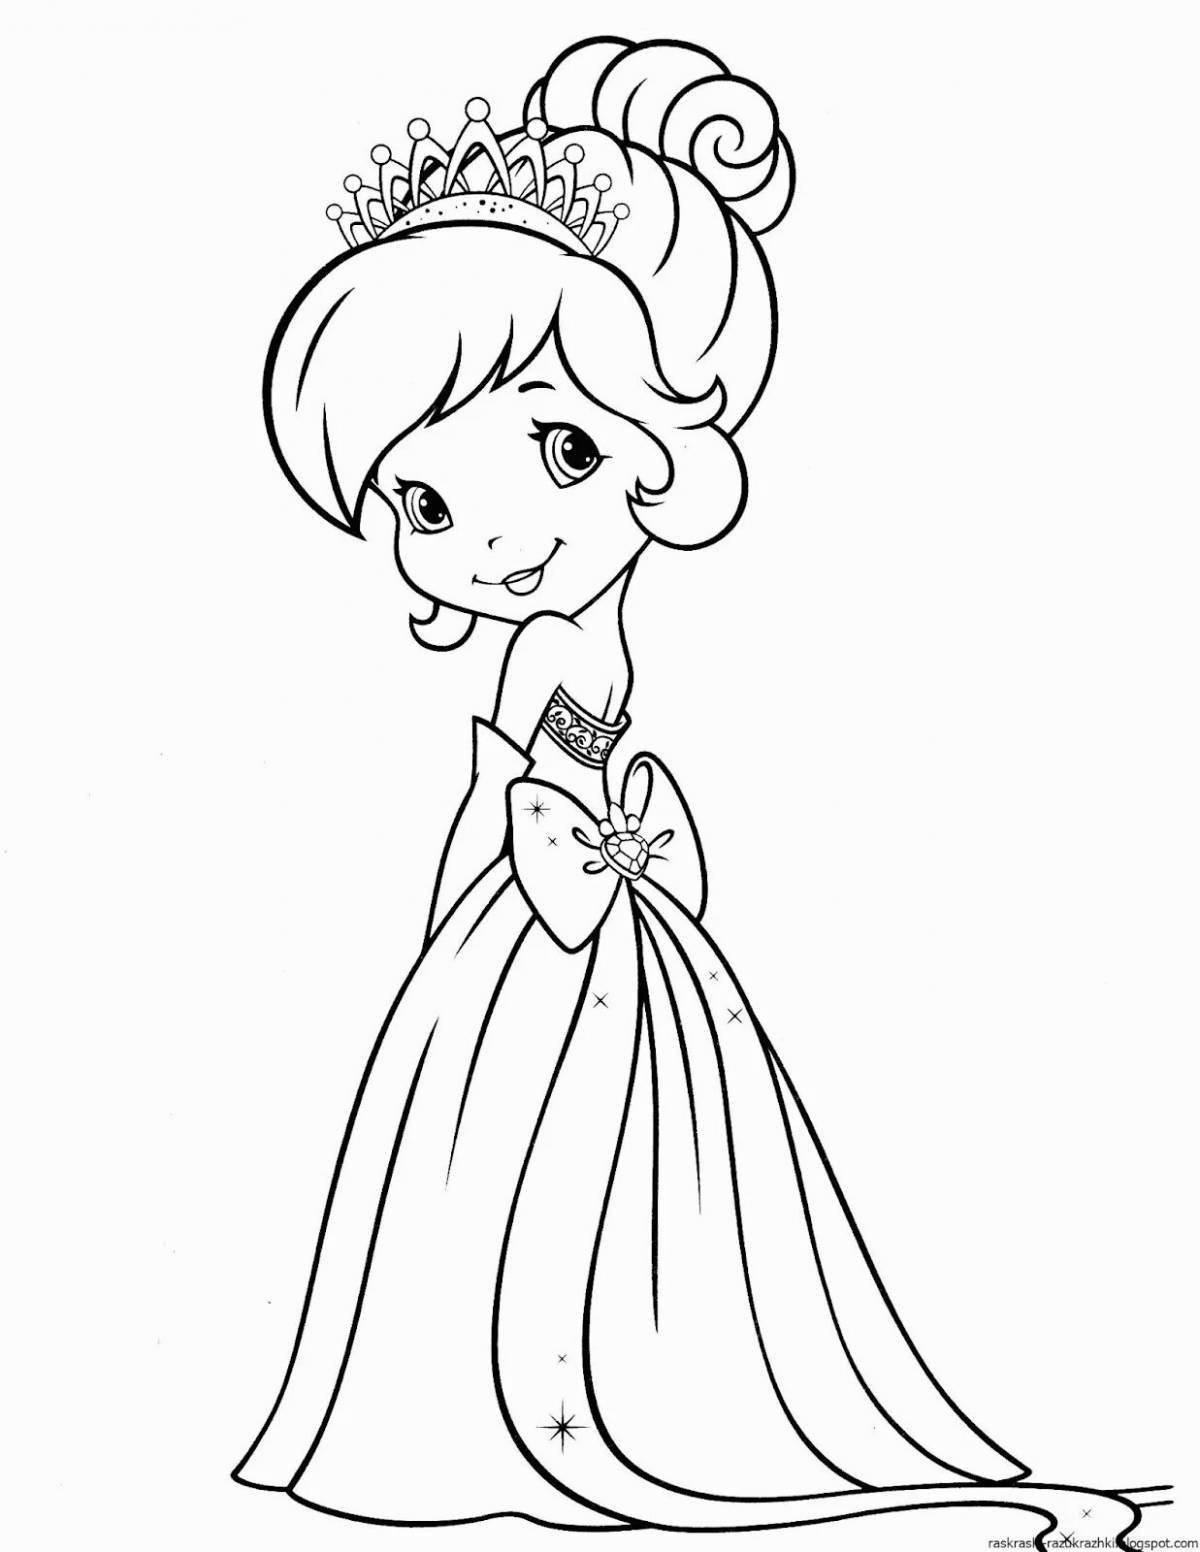 Amazing coloring book for 3-4 year olds for girls princess